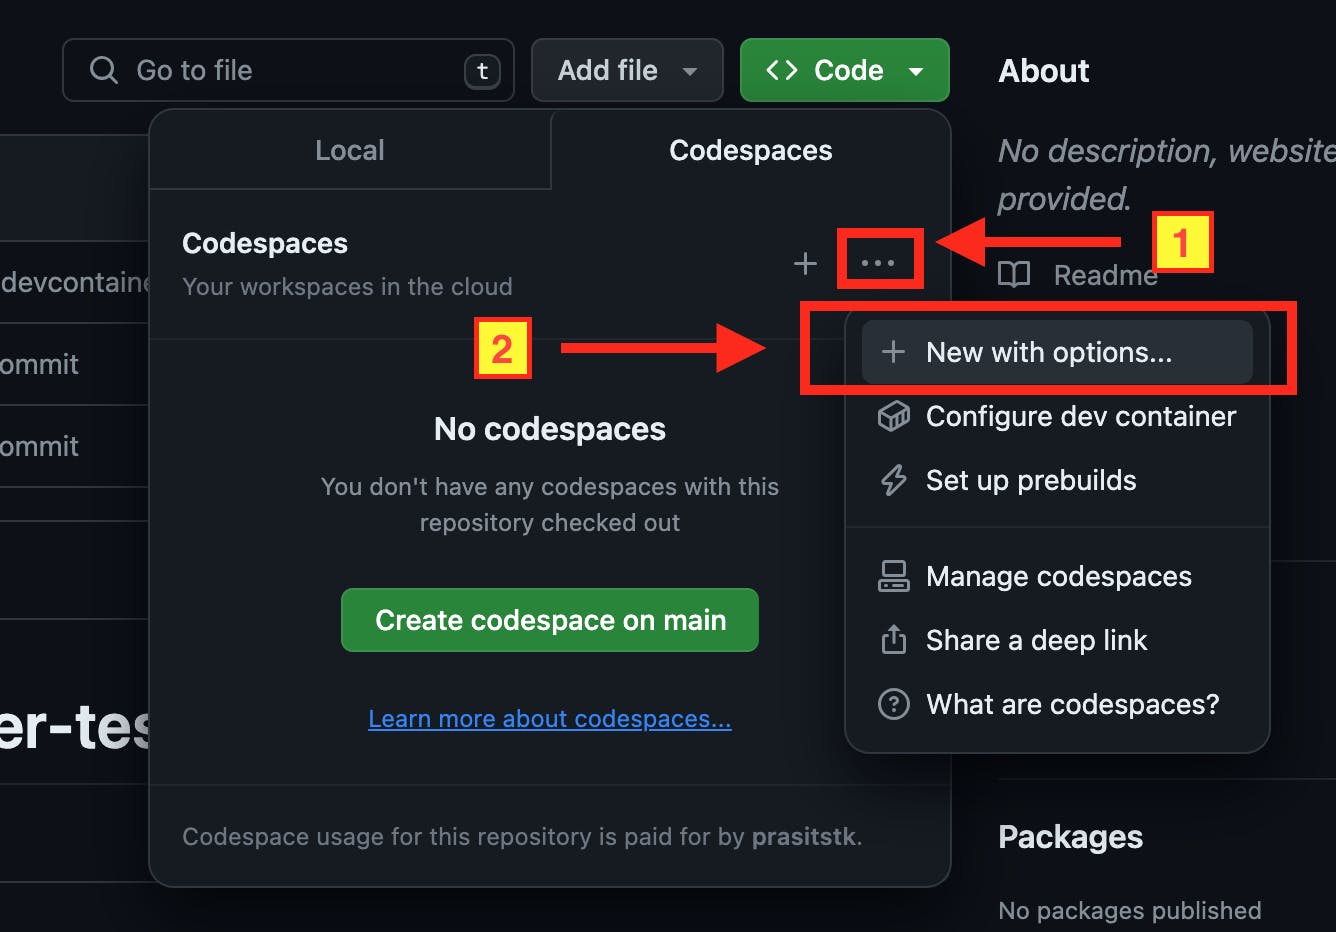 Navigate to the menu of the advanced options method to create a Codespace